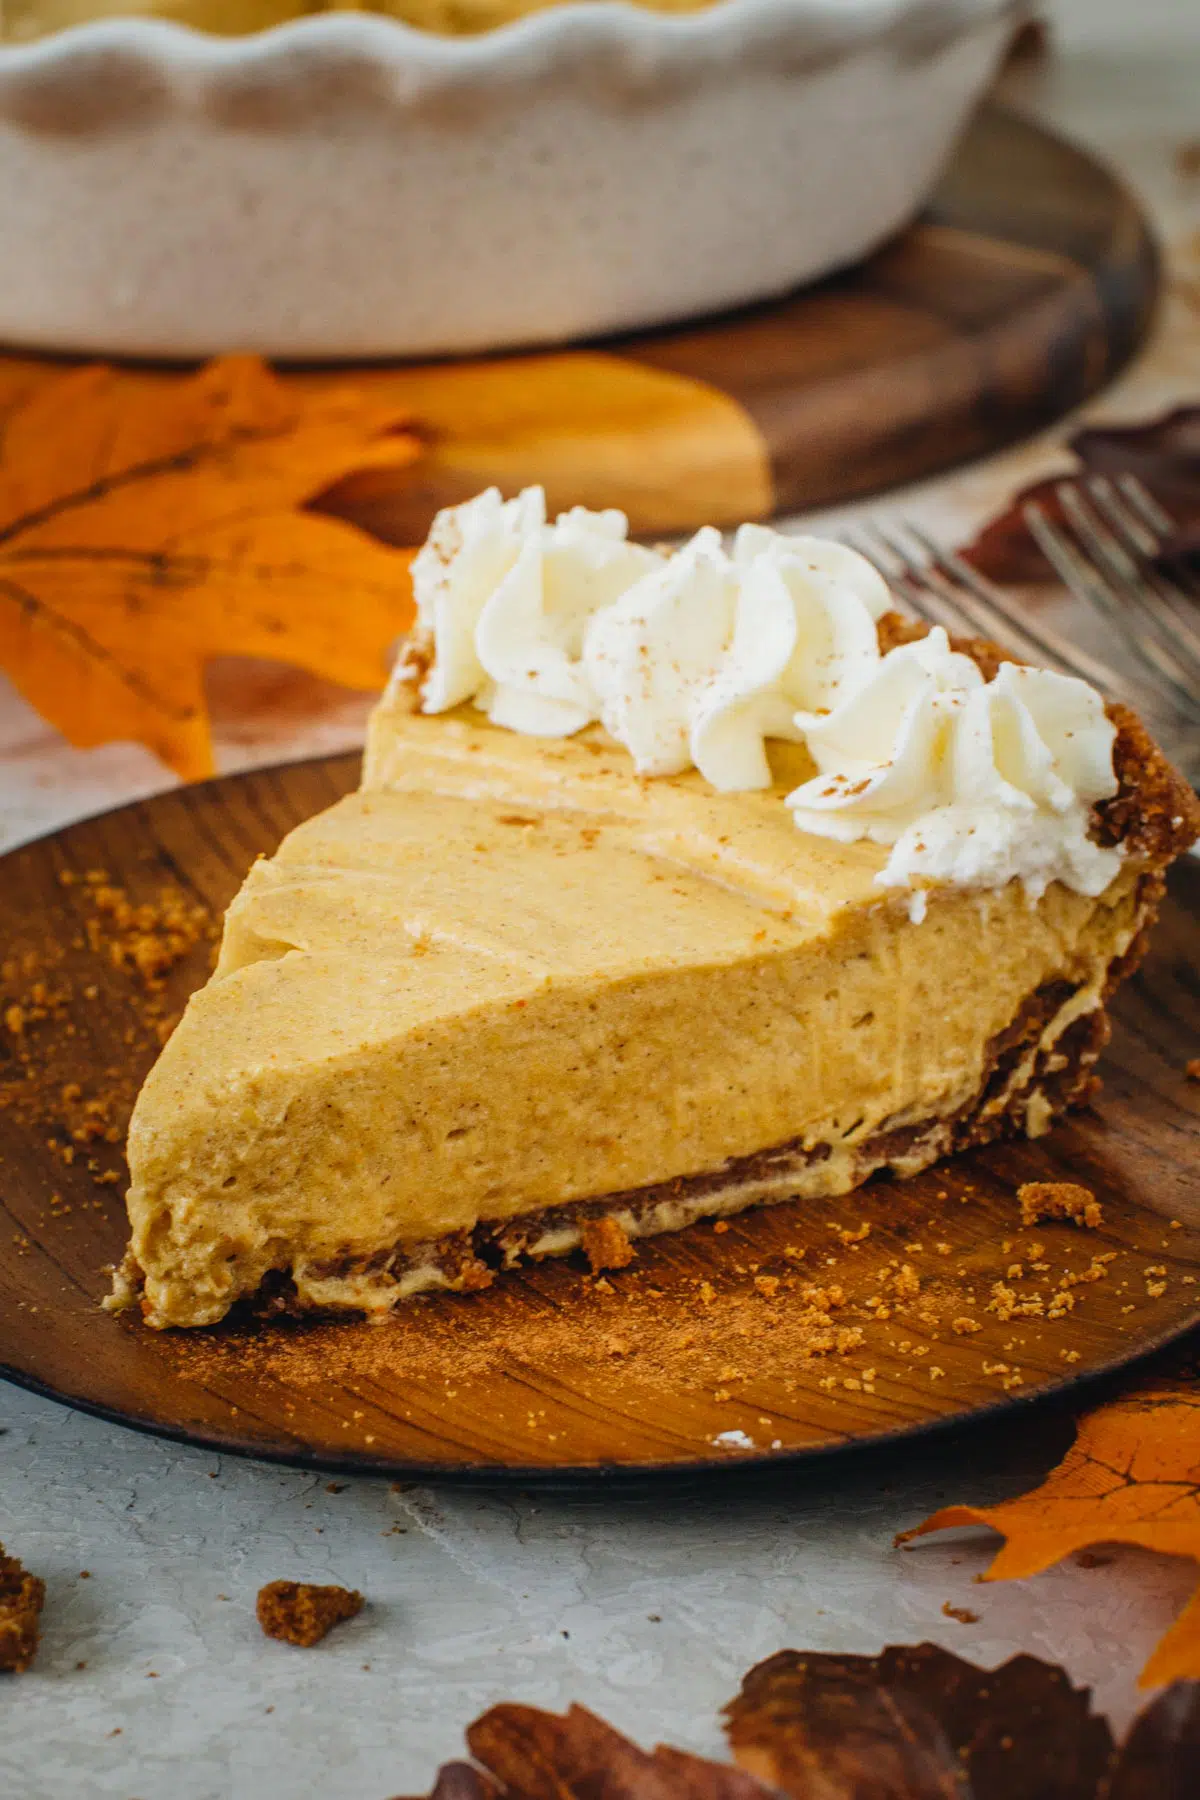 No-bake pumpkin pie slice with whipped cream on a wooden plate.